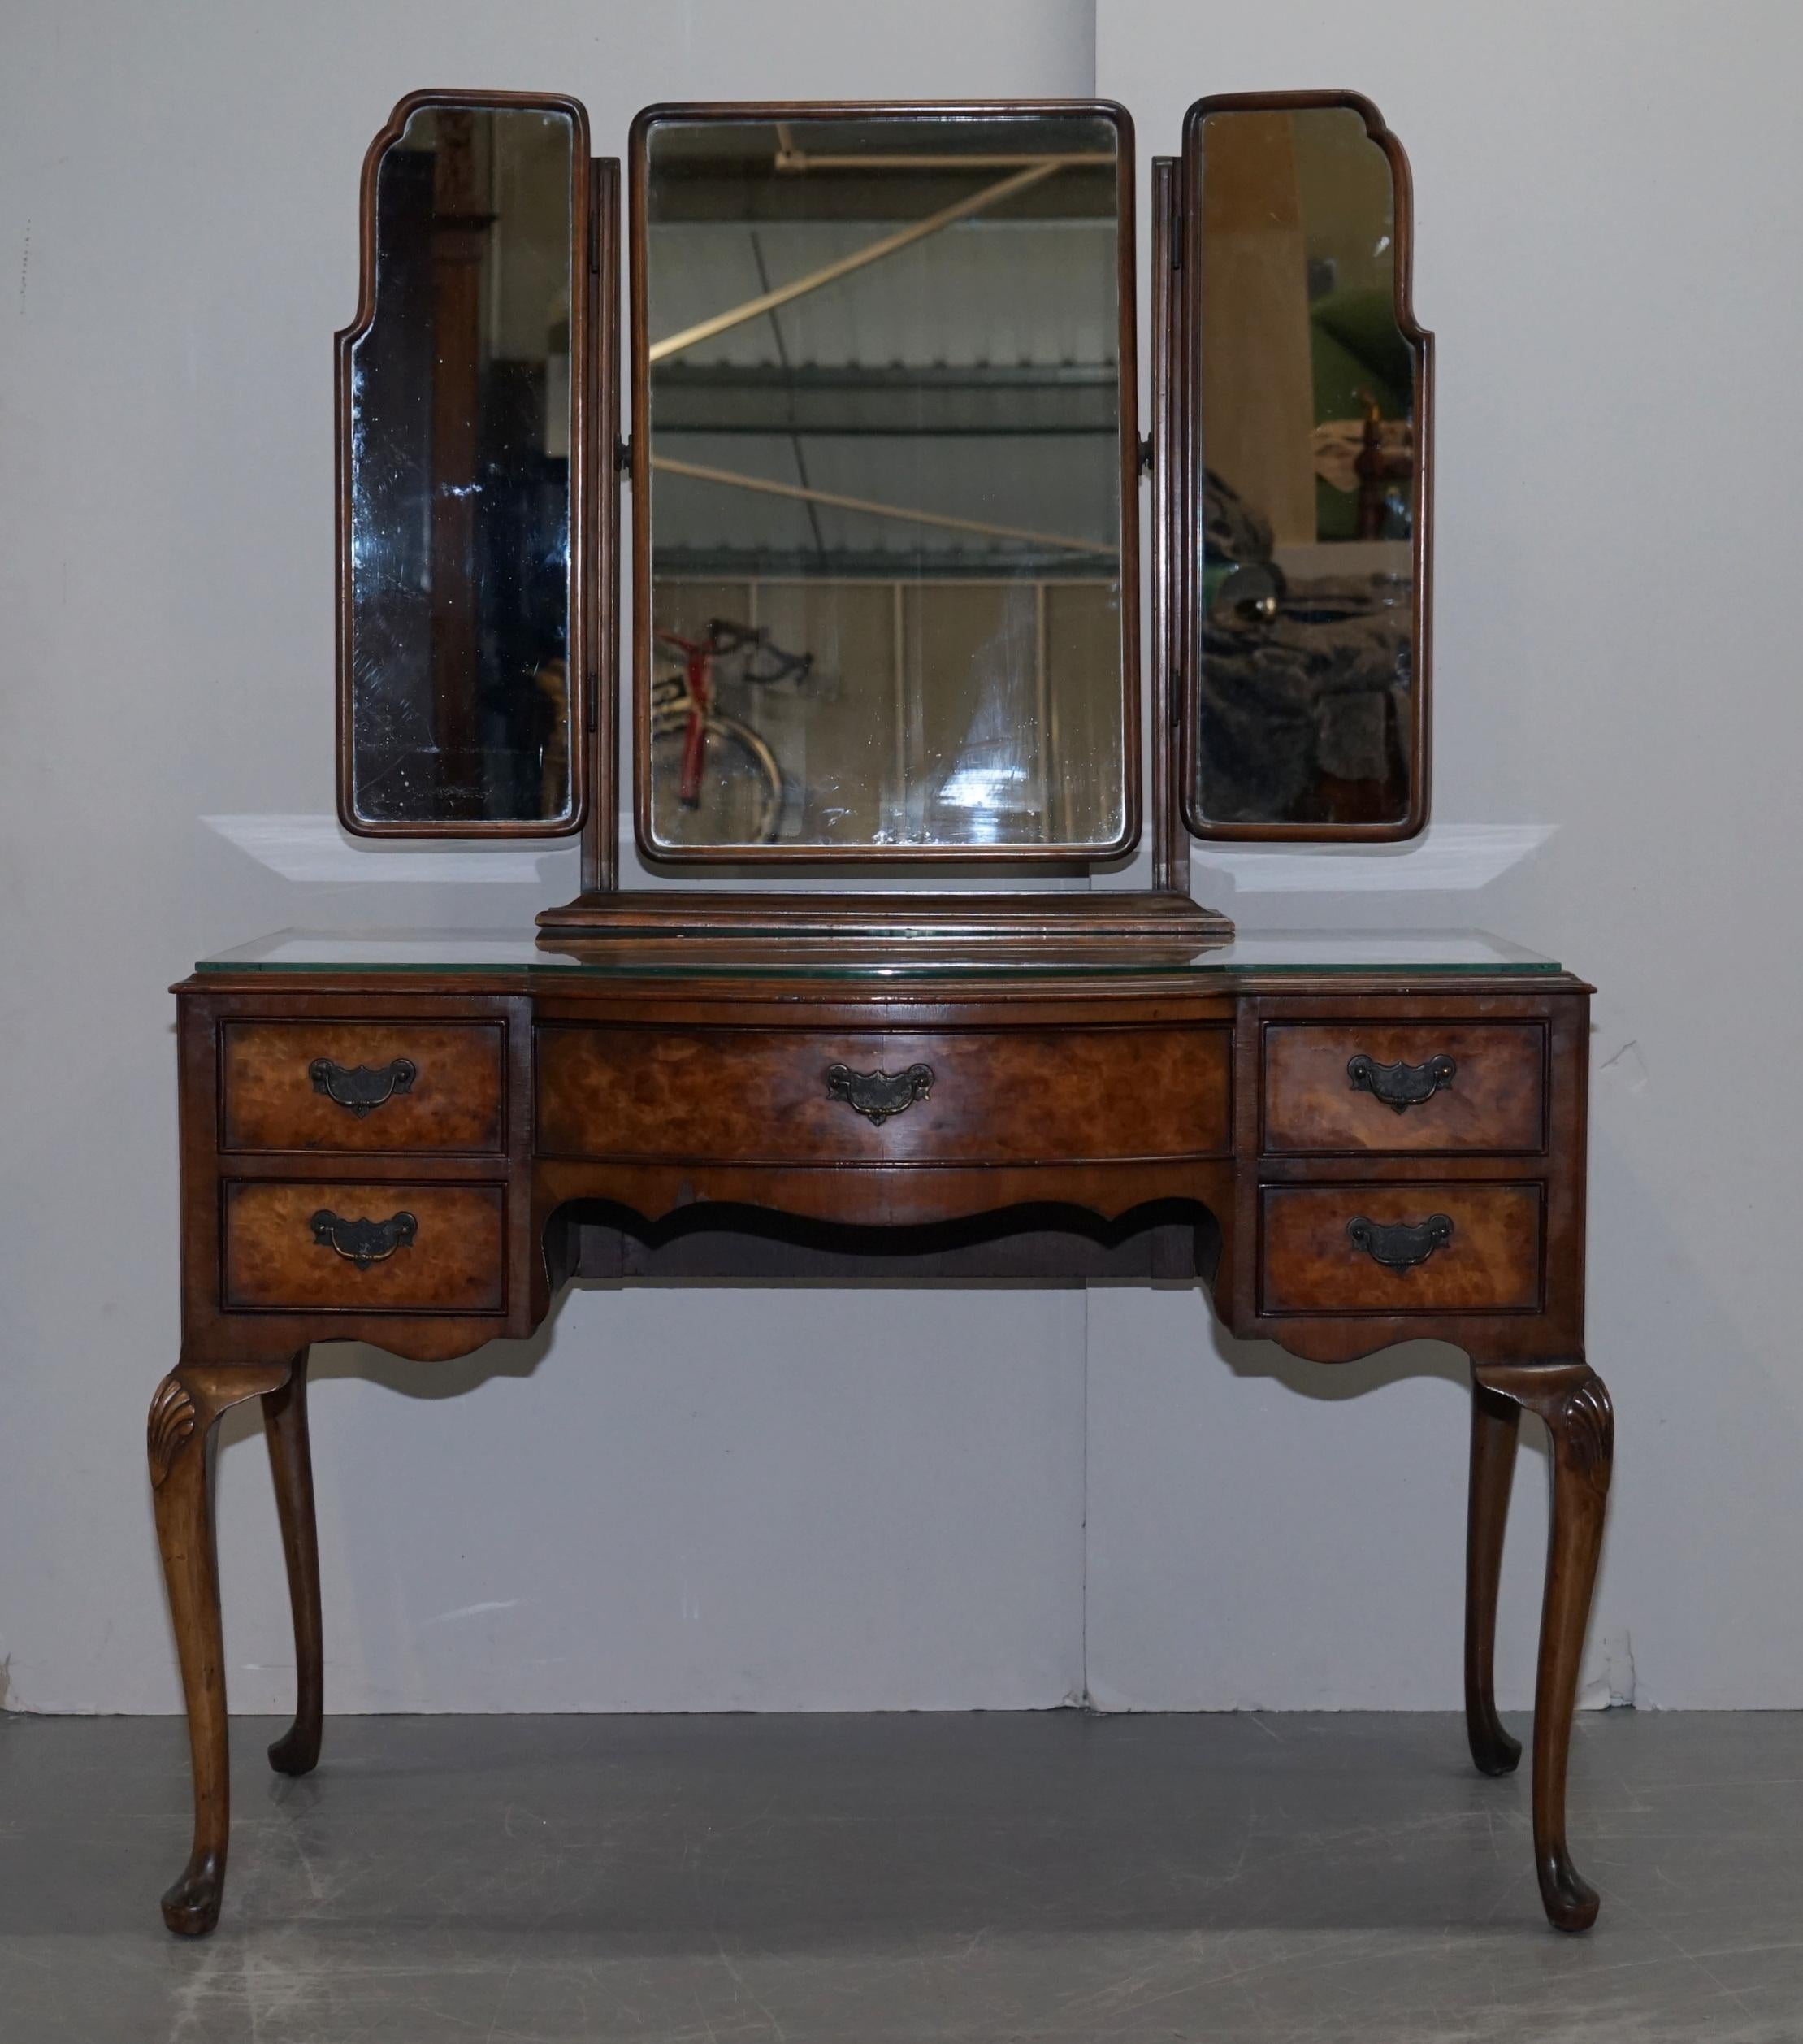 We are delighted to offer for sale this stunning circa 1930s burr and burl walnut dressing table with tri-folding mirrors

This dressing really is exquisite, the walnut simply glows in the right light, the tri-fold mirrors are easily adjustable

We